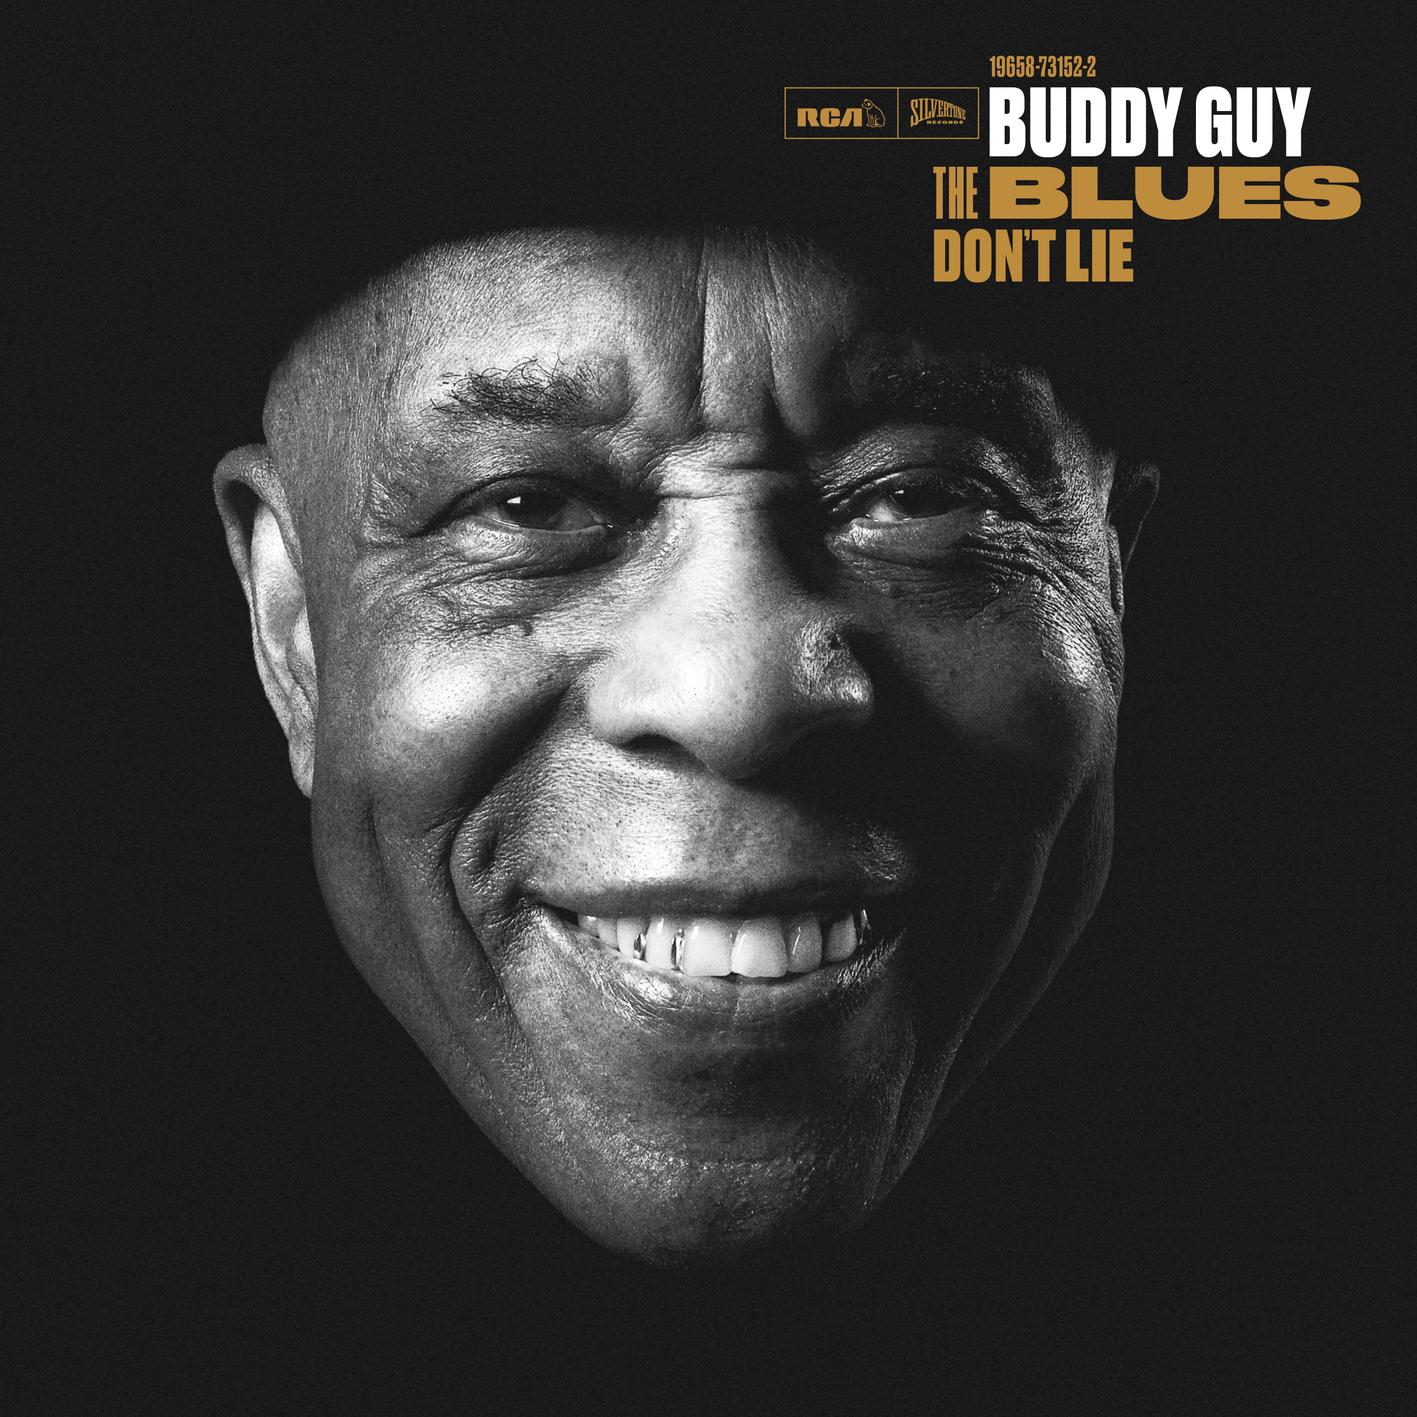 Buddy Guy - 2022 - The Blues Don't Lie (24-44.1)